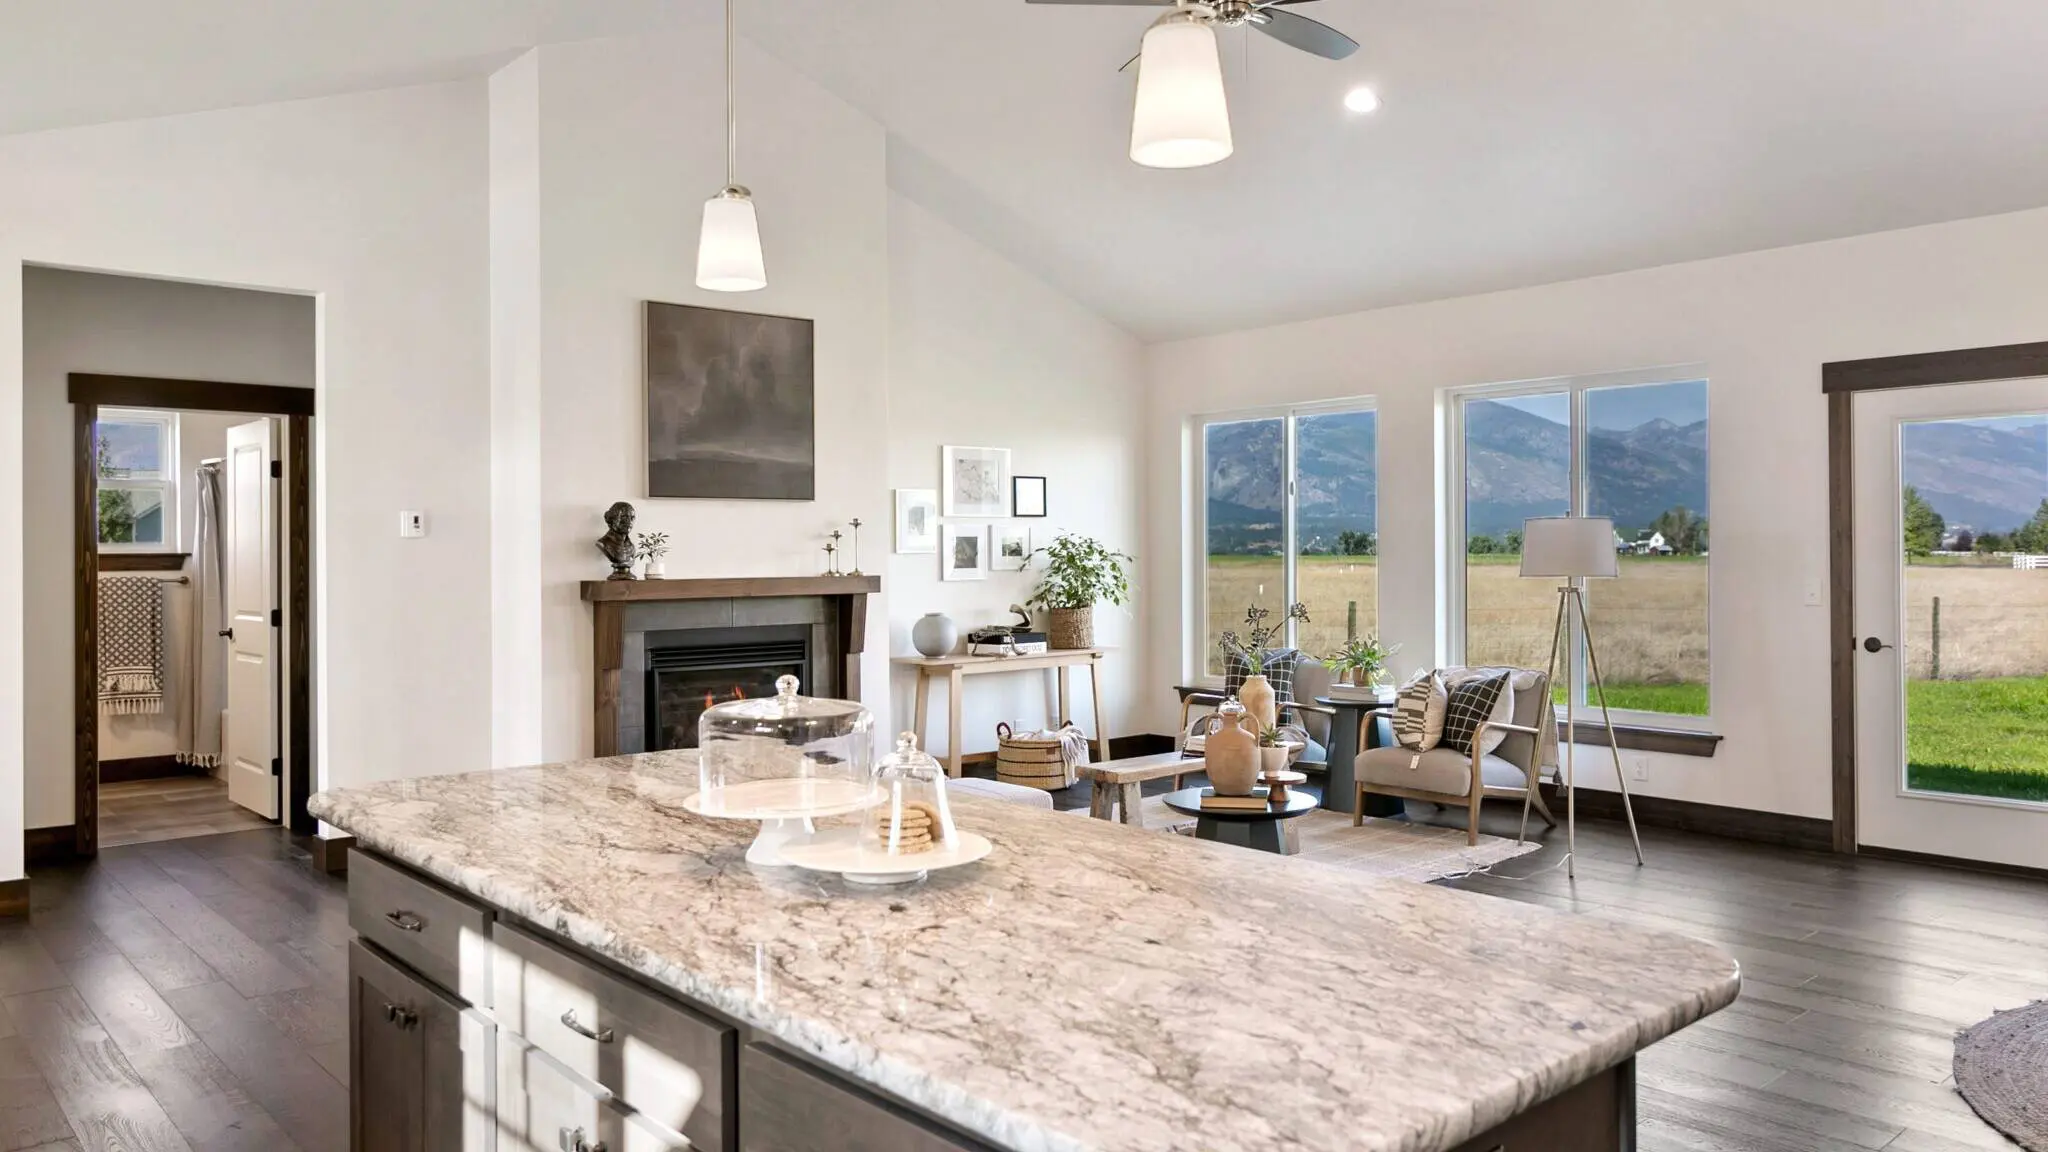 Kitchen island in The Seeley model home - Built by Big Sky Builder in Hamilton, MT